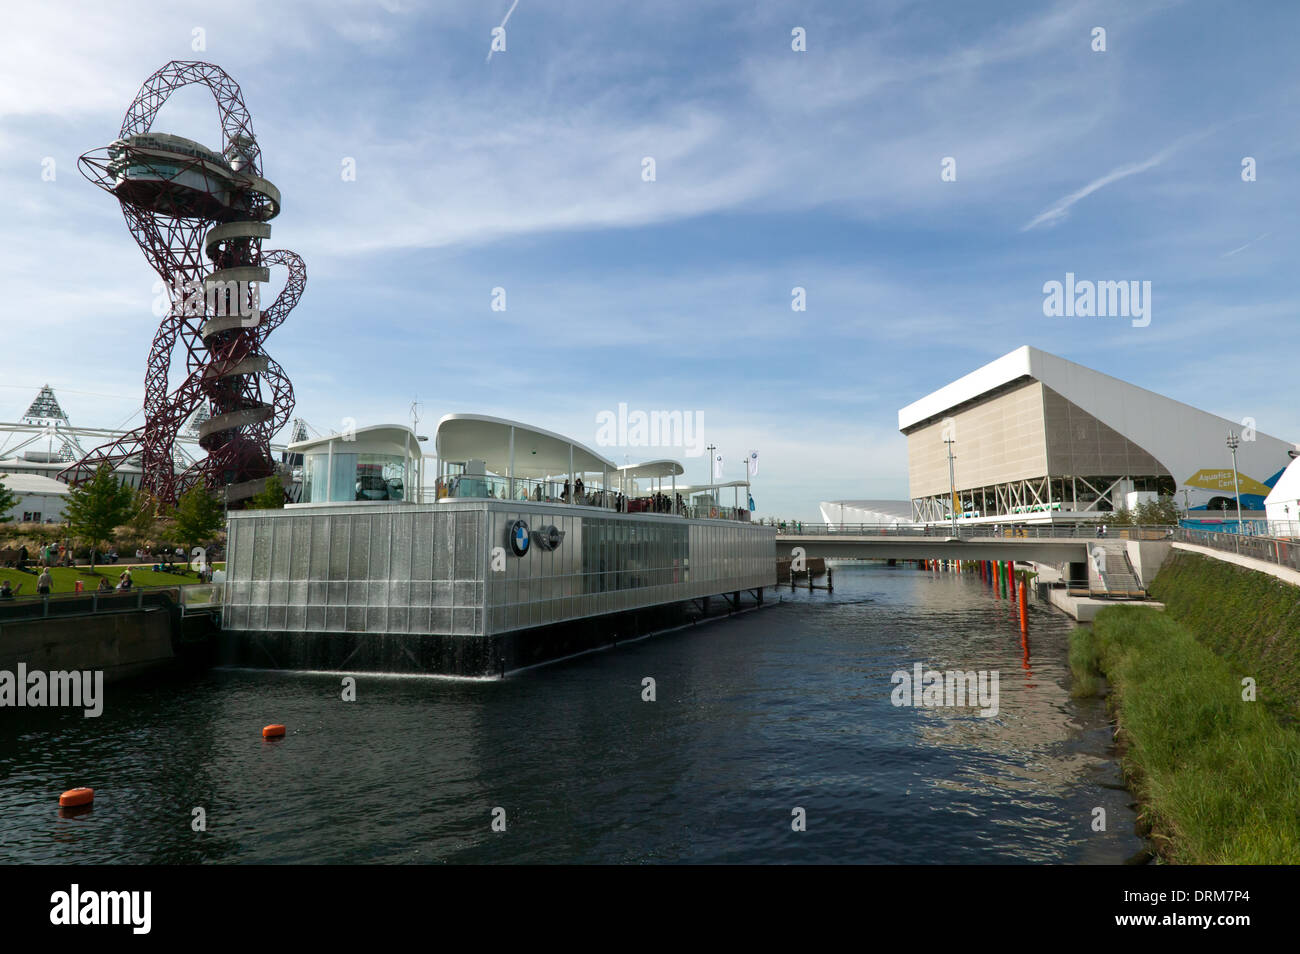 View looking down the River Lea, towards the BMW Group Pavilion and the Aquatics certre in the Olympic Park. Stock Photo